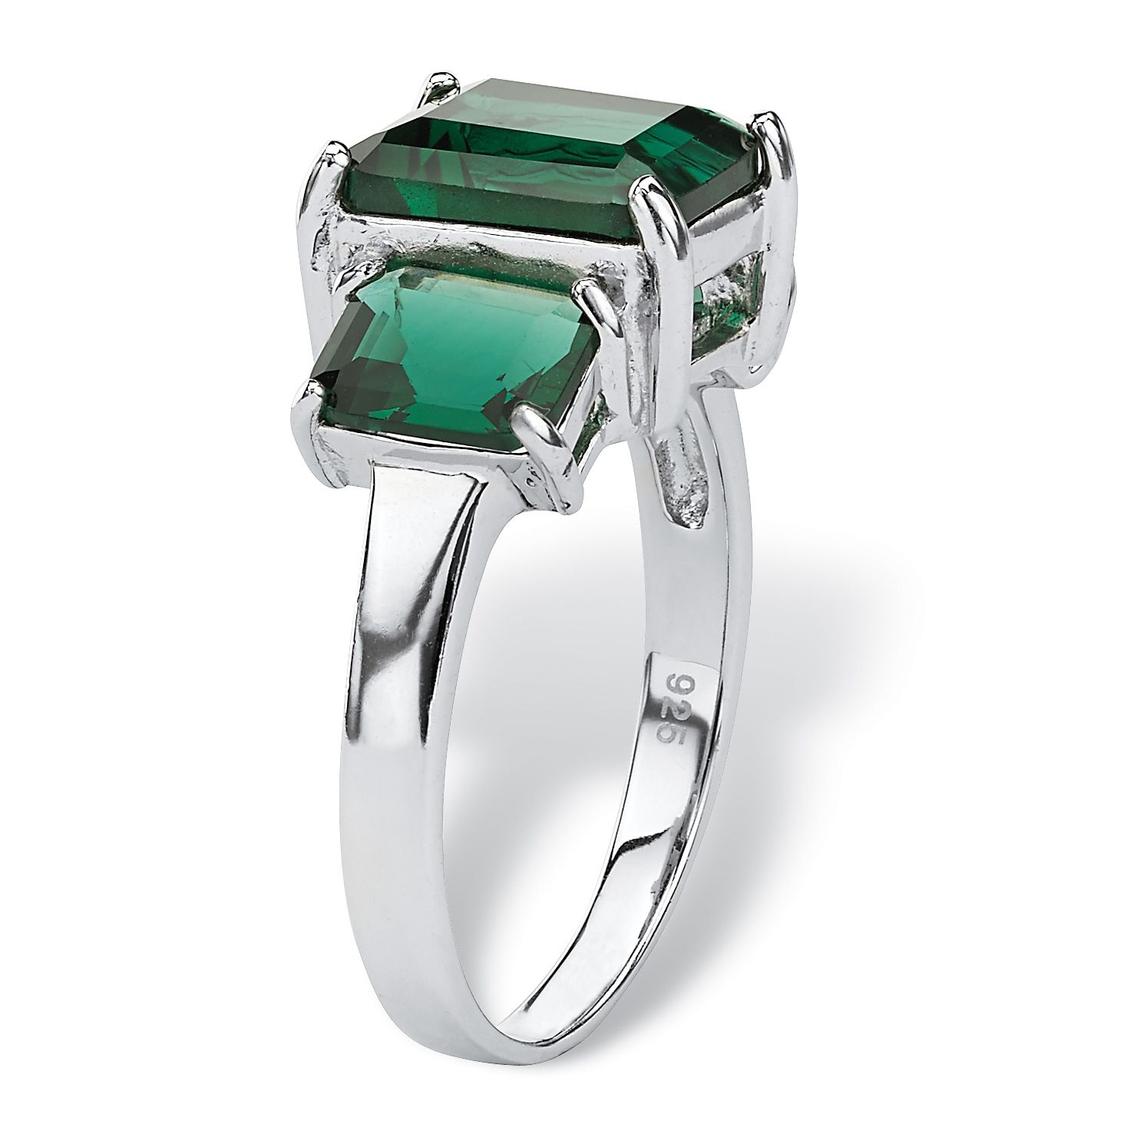 Emerald-Cut Simulated Green Emerald 3-Stone Ring in Sterling Silver - Image 2 of 5